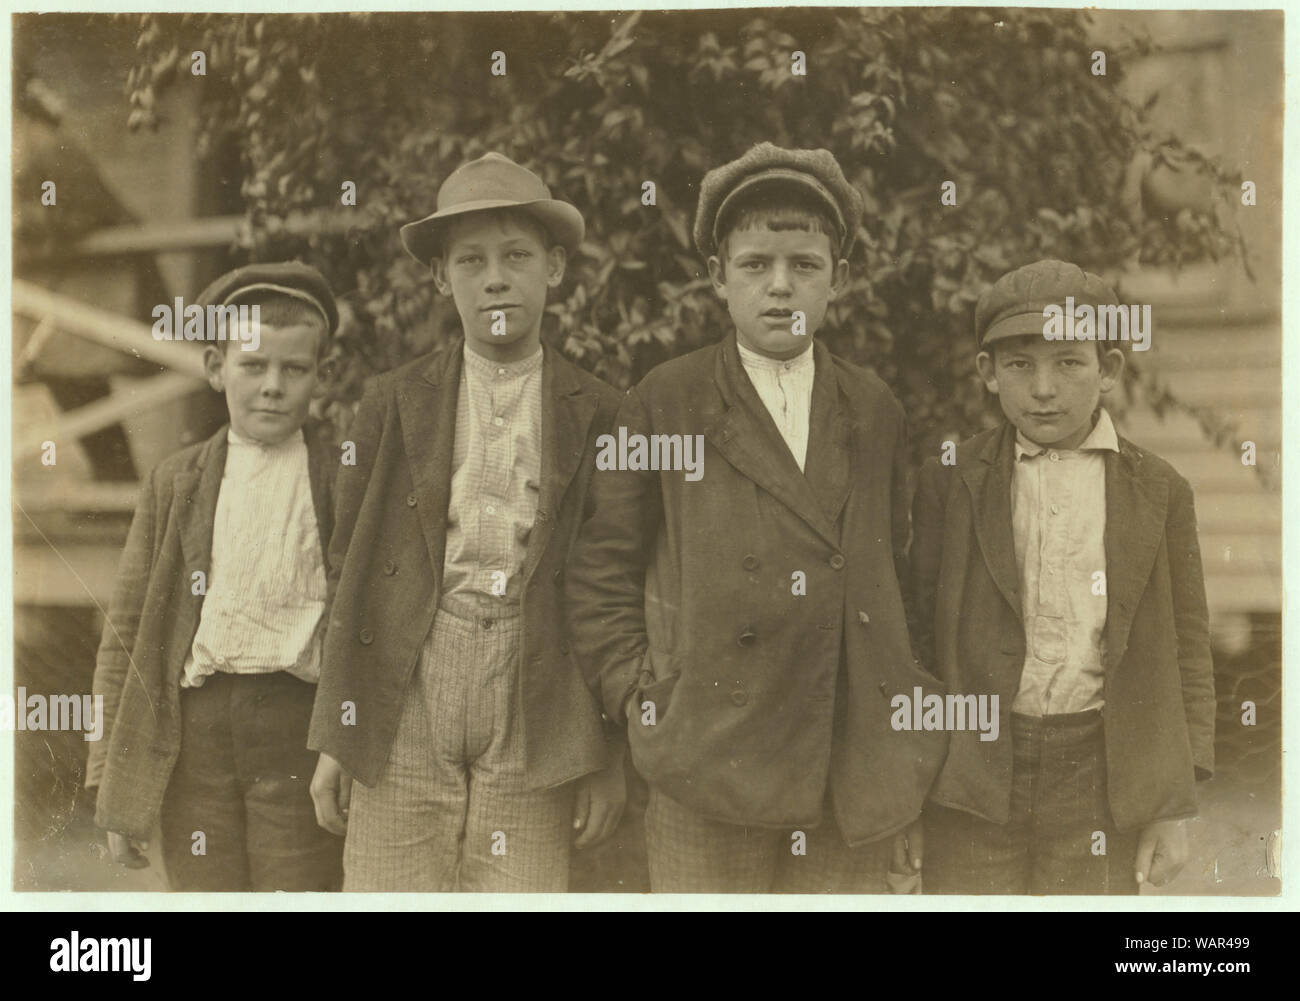 Dickson Mill, Laurinburg, N.C. Robert Black, (smallest) 1 year in mill. John Black, (next) 2 years in mill. Charlie Clark--4 years. Earl Lander--Beginning. Witness, S.R. Hine. Abstract: Photographs from the records of the National Child Labor Committee (U.S.) Stock Photo